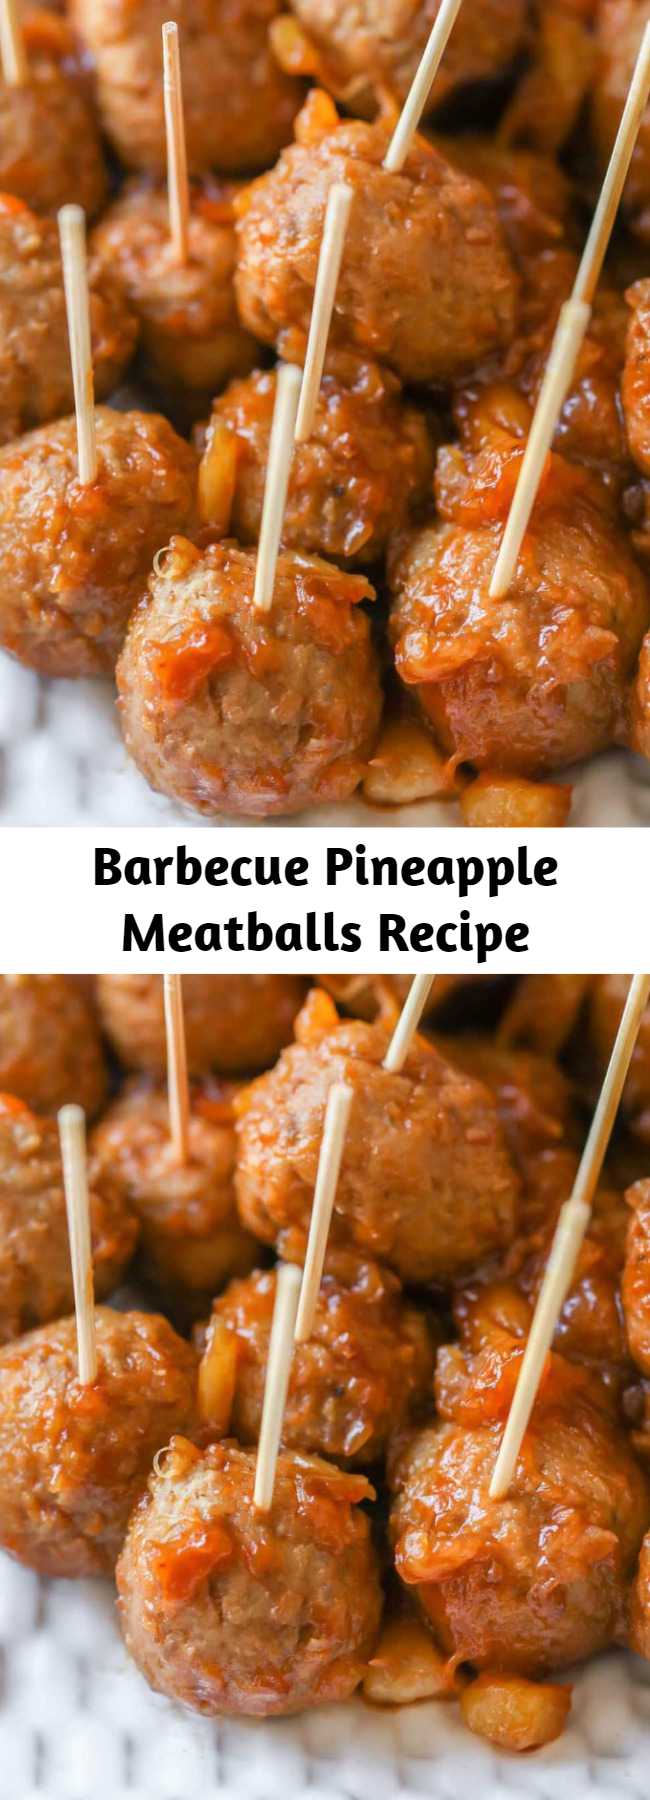 Barbecue Pineapple Meatballs Recipe - These Barbecue Pineapple Meatballs use just 3 ingredients - barbecue sauce, frozen meatballs, and crushed pineapple. They are perfect as an appetizer recipe for parties and get togethers or even a side dish for dinner.